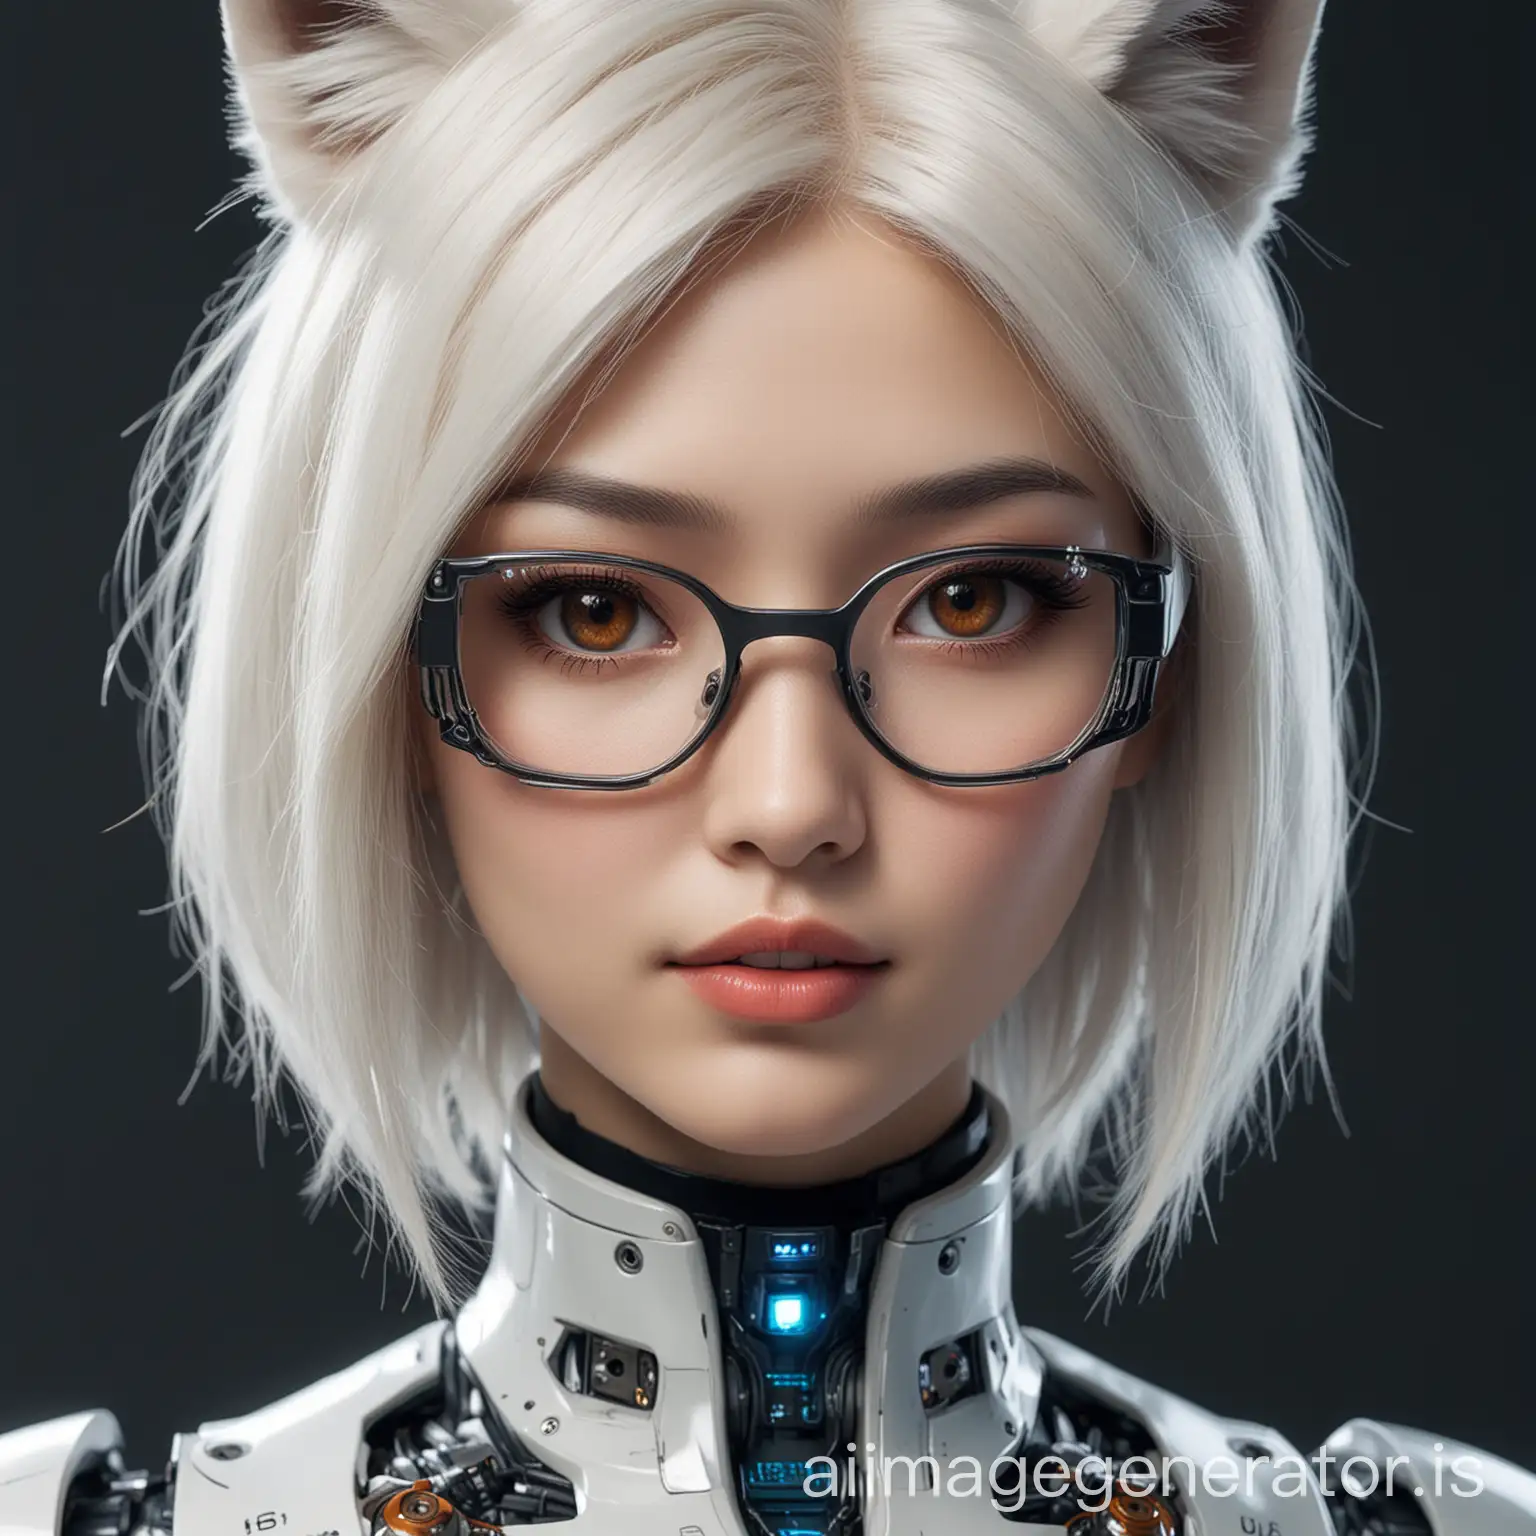  Asian Robot girl, online assistant, white hair. Glasses. Personifying artificial intelligence in the form of a logo. I want to put it as the logo of the online assistant in the system. With feminine features, sexy, 18-20 years old and as futuristic as possible. With human elements such as hair, etc. Without a headset or headphones. Foreground. Background is transparent. Without a background, the face should be looking straight at me. Brunette. Big breasts. "Foxes" i.e. cunning, but human eyes and long eyelashes. Plump lips. At the bottom text "ASSISTANT" in a futuristic font.